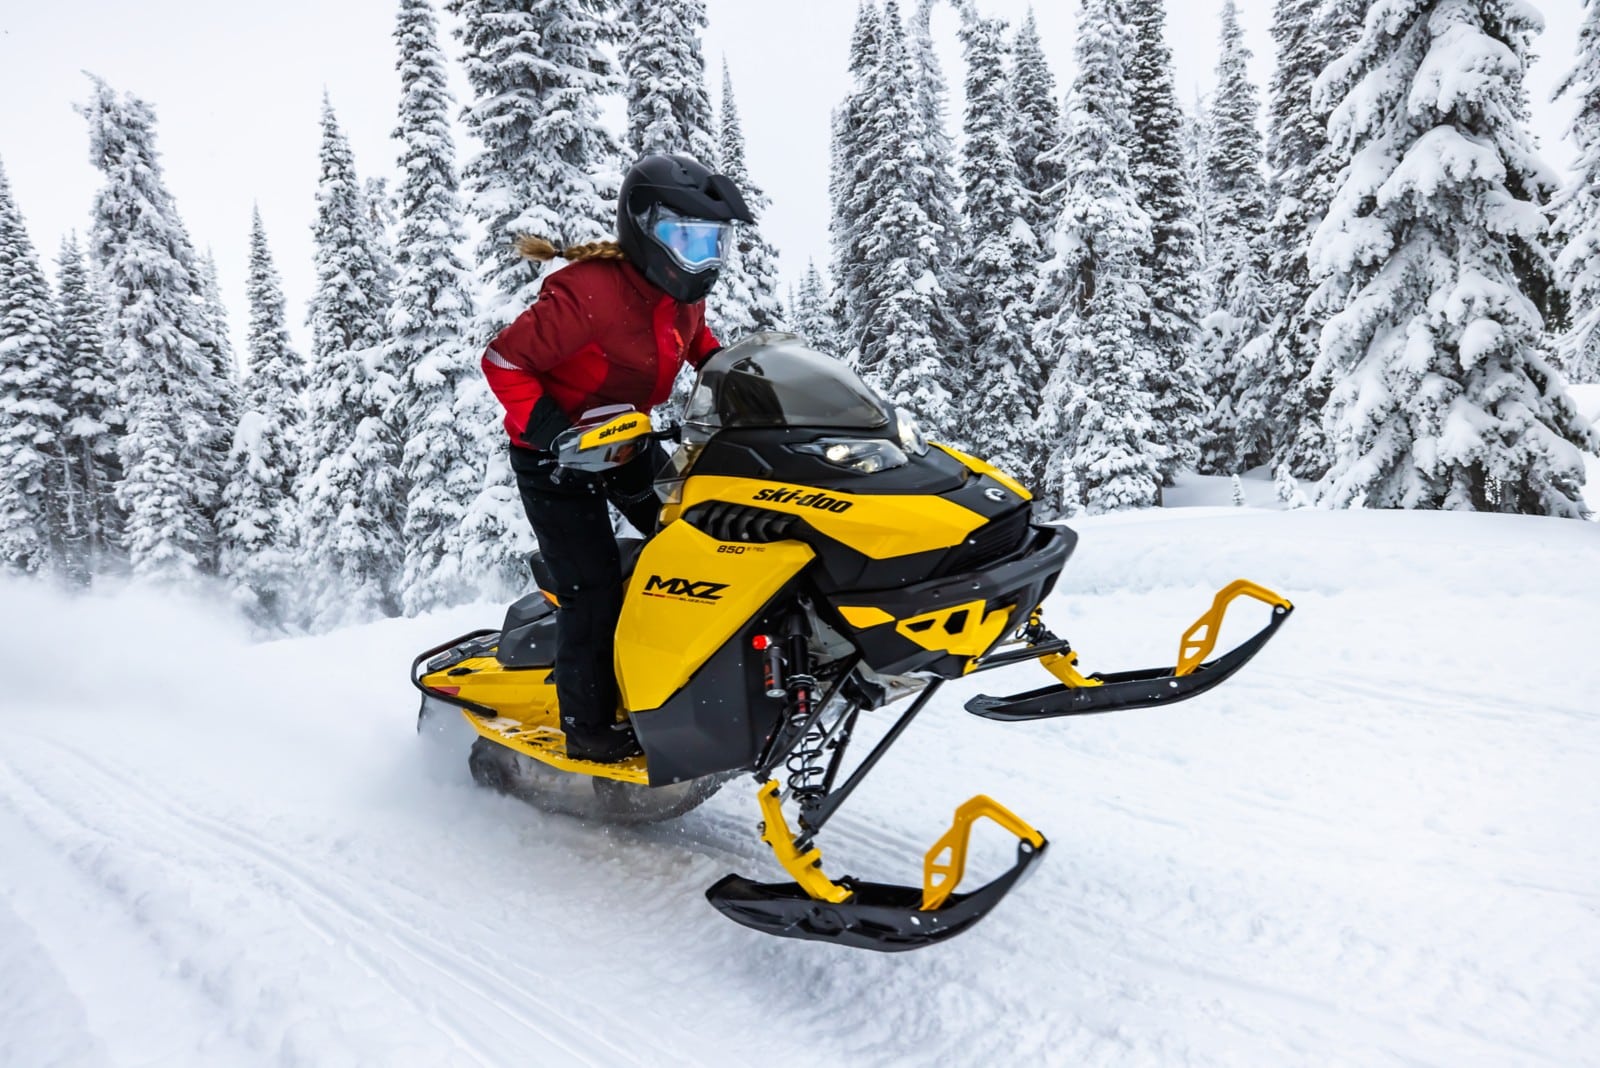 8 Features to Look For When Buying a Snowmobile